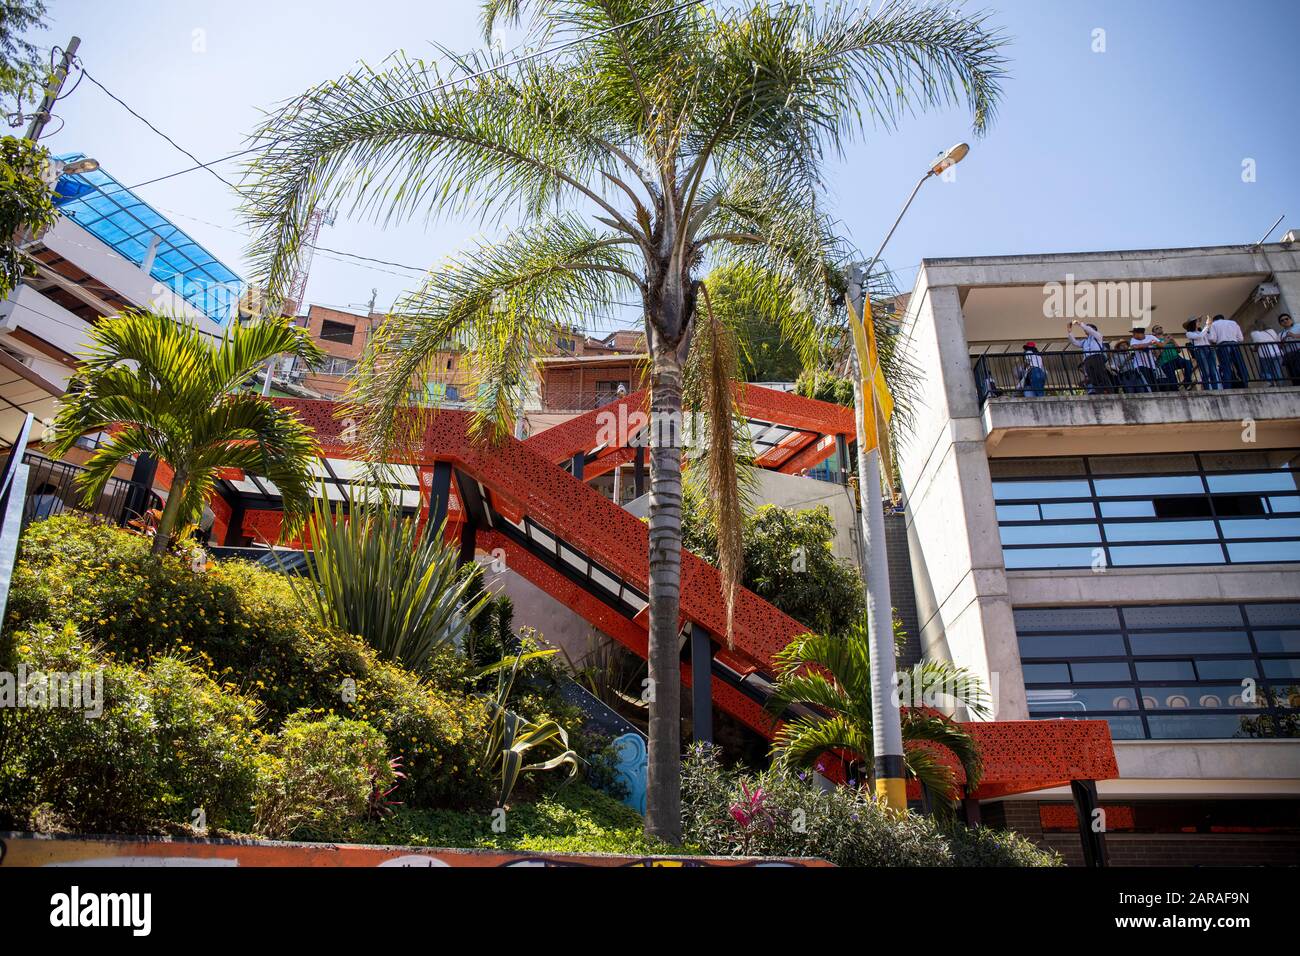 Medellin, Colombia:  Comuna 13 was considered the most dangerous area in Medellin. The escalator project has helped to transform the area. Stock Photo